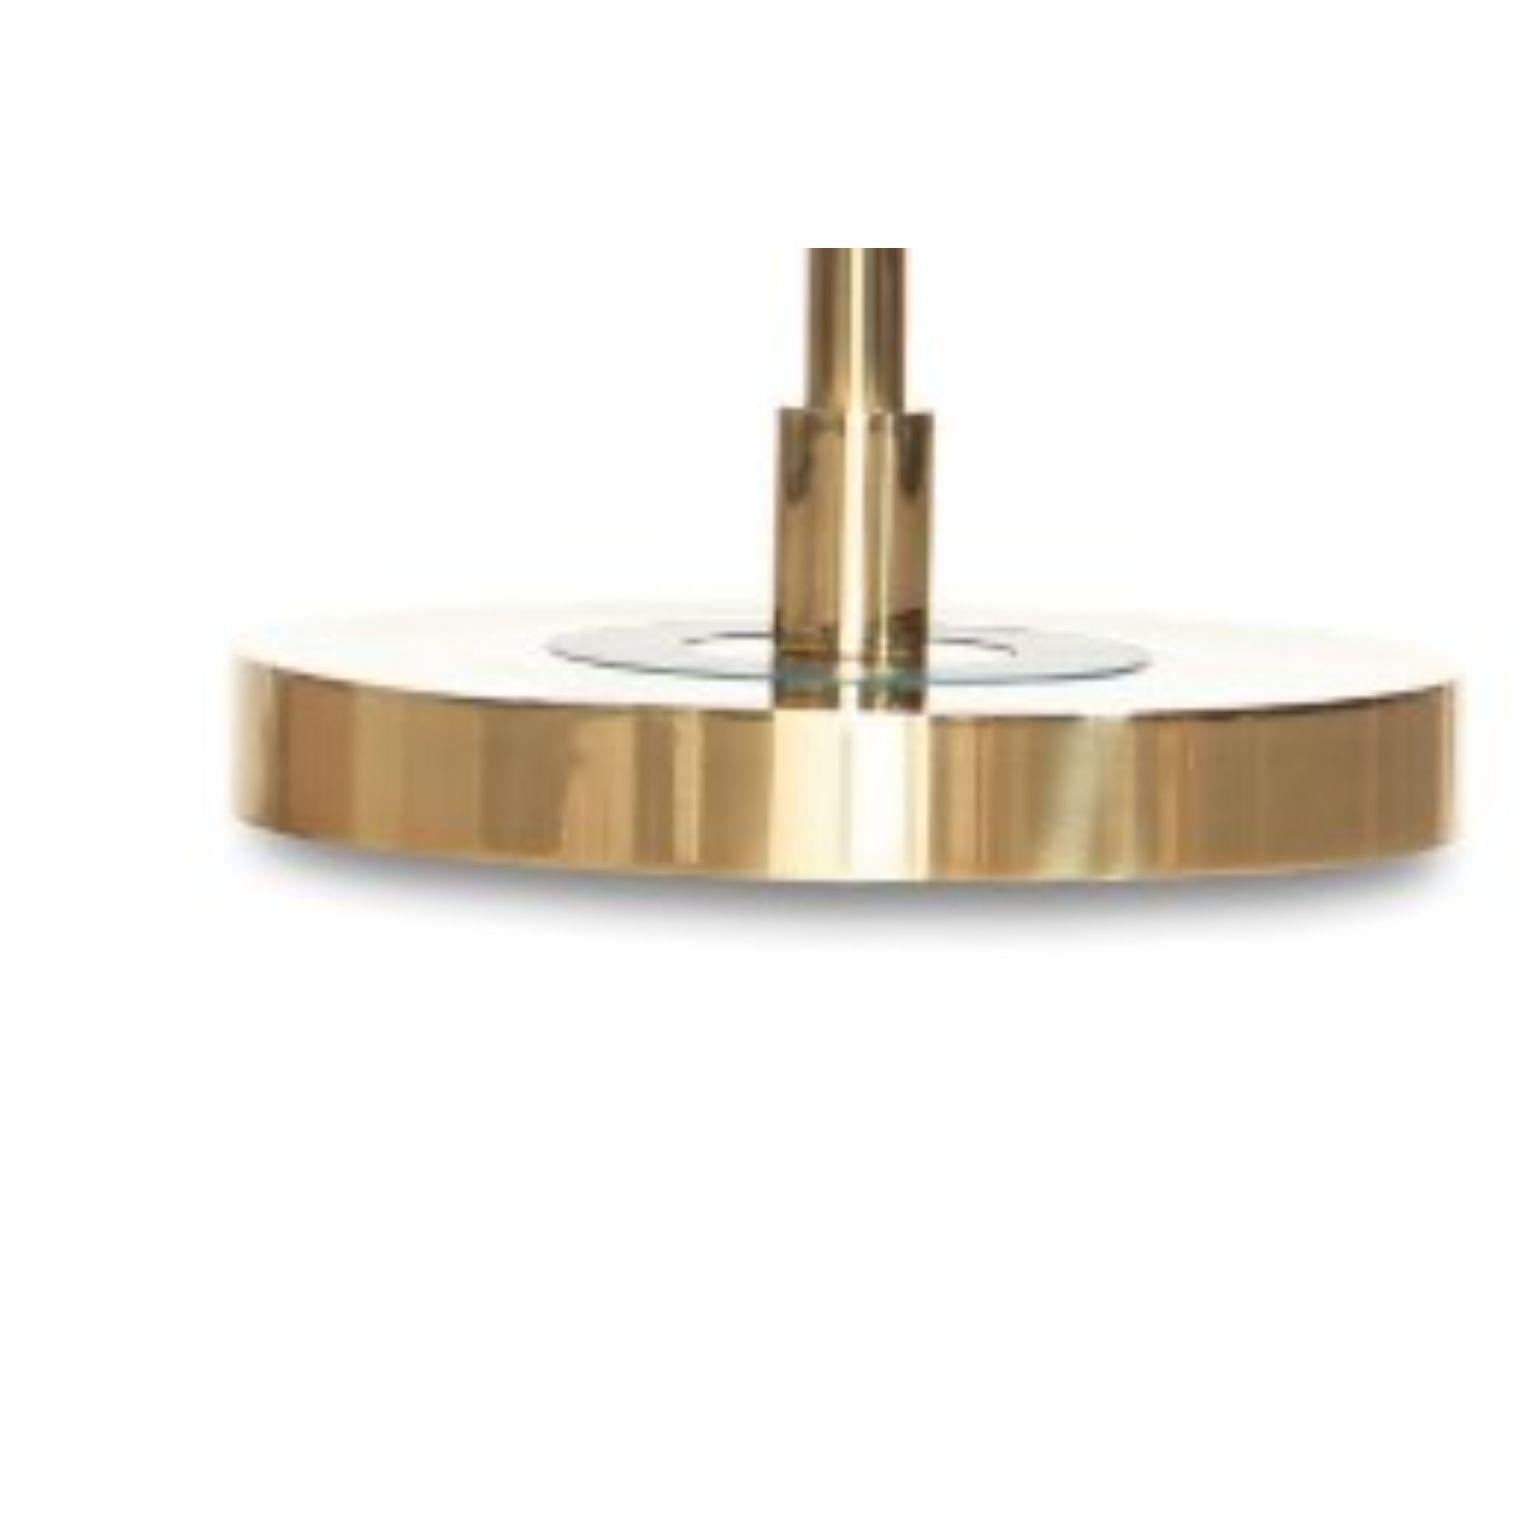 Contemporary Revolve Table Lamp, Brushed Brass, Green by Bert Frank